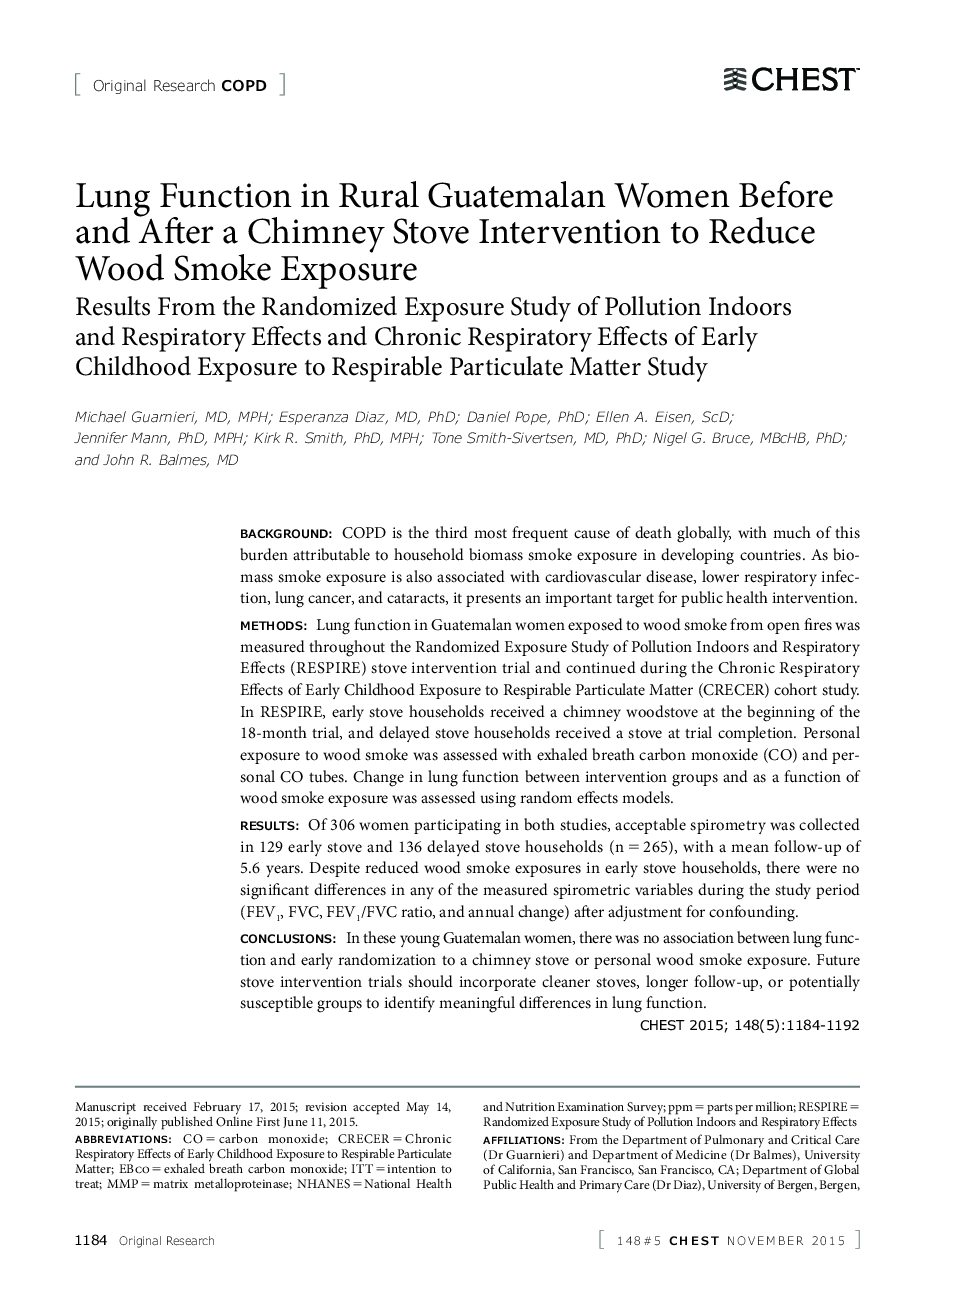 Original Research COPDLung Function in Rural Guatemalan Women Before and After a Chimney Stove Intervention to Reduce Wood Smoke Exposure: Results From the Randomized Exposure Study of Pollution Indoors and Respiratory Effects and Chronic Respiratory Effe